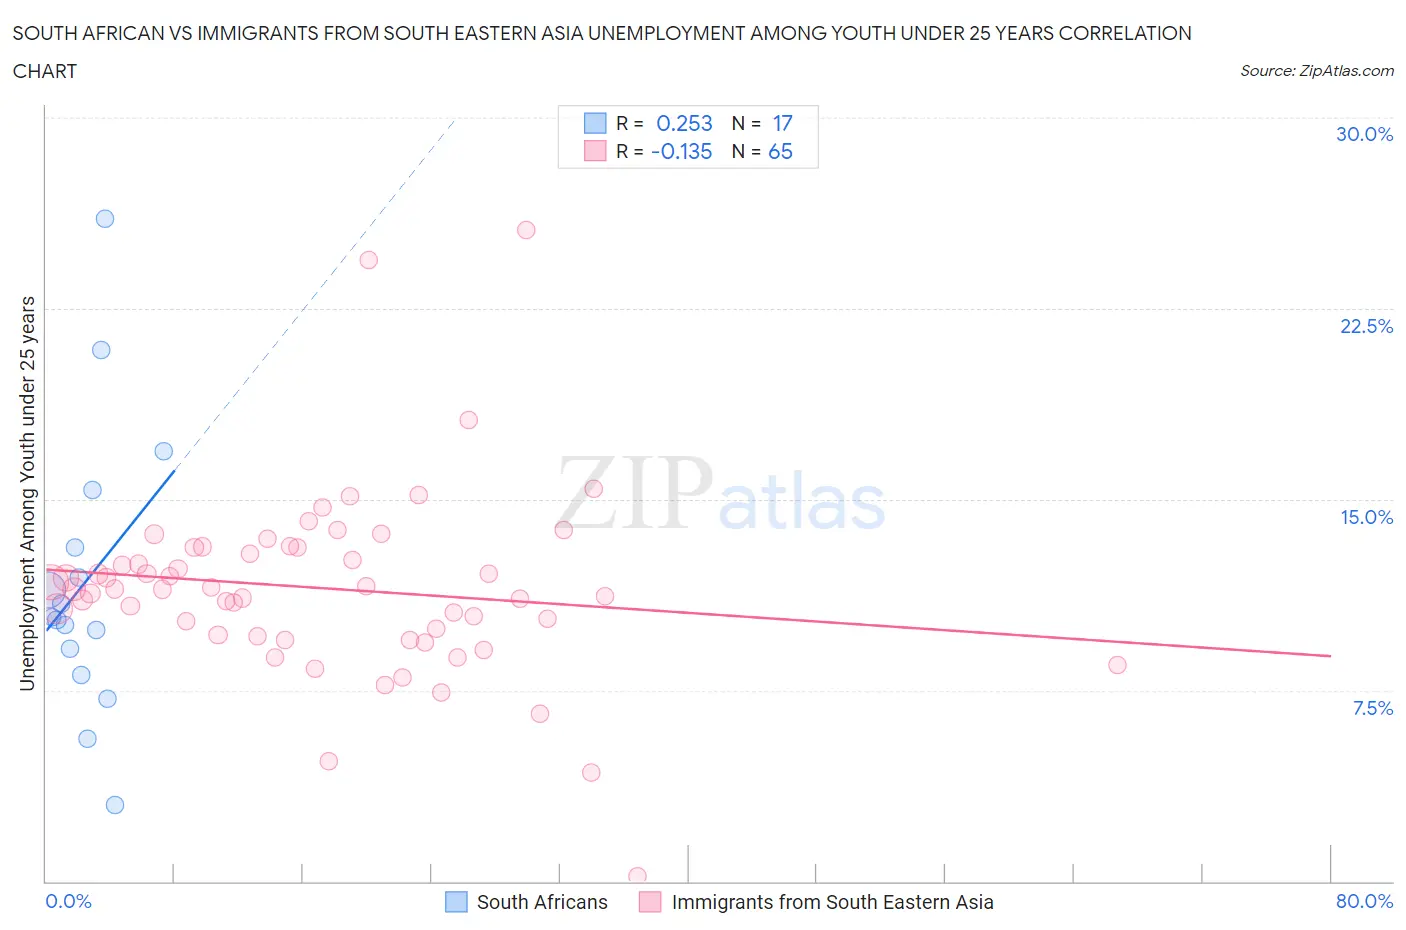 South African vs Immigrants from South Eastern Asia Unemployment Among Youth under 25 years